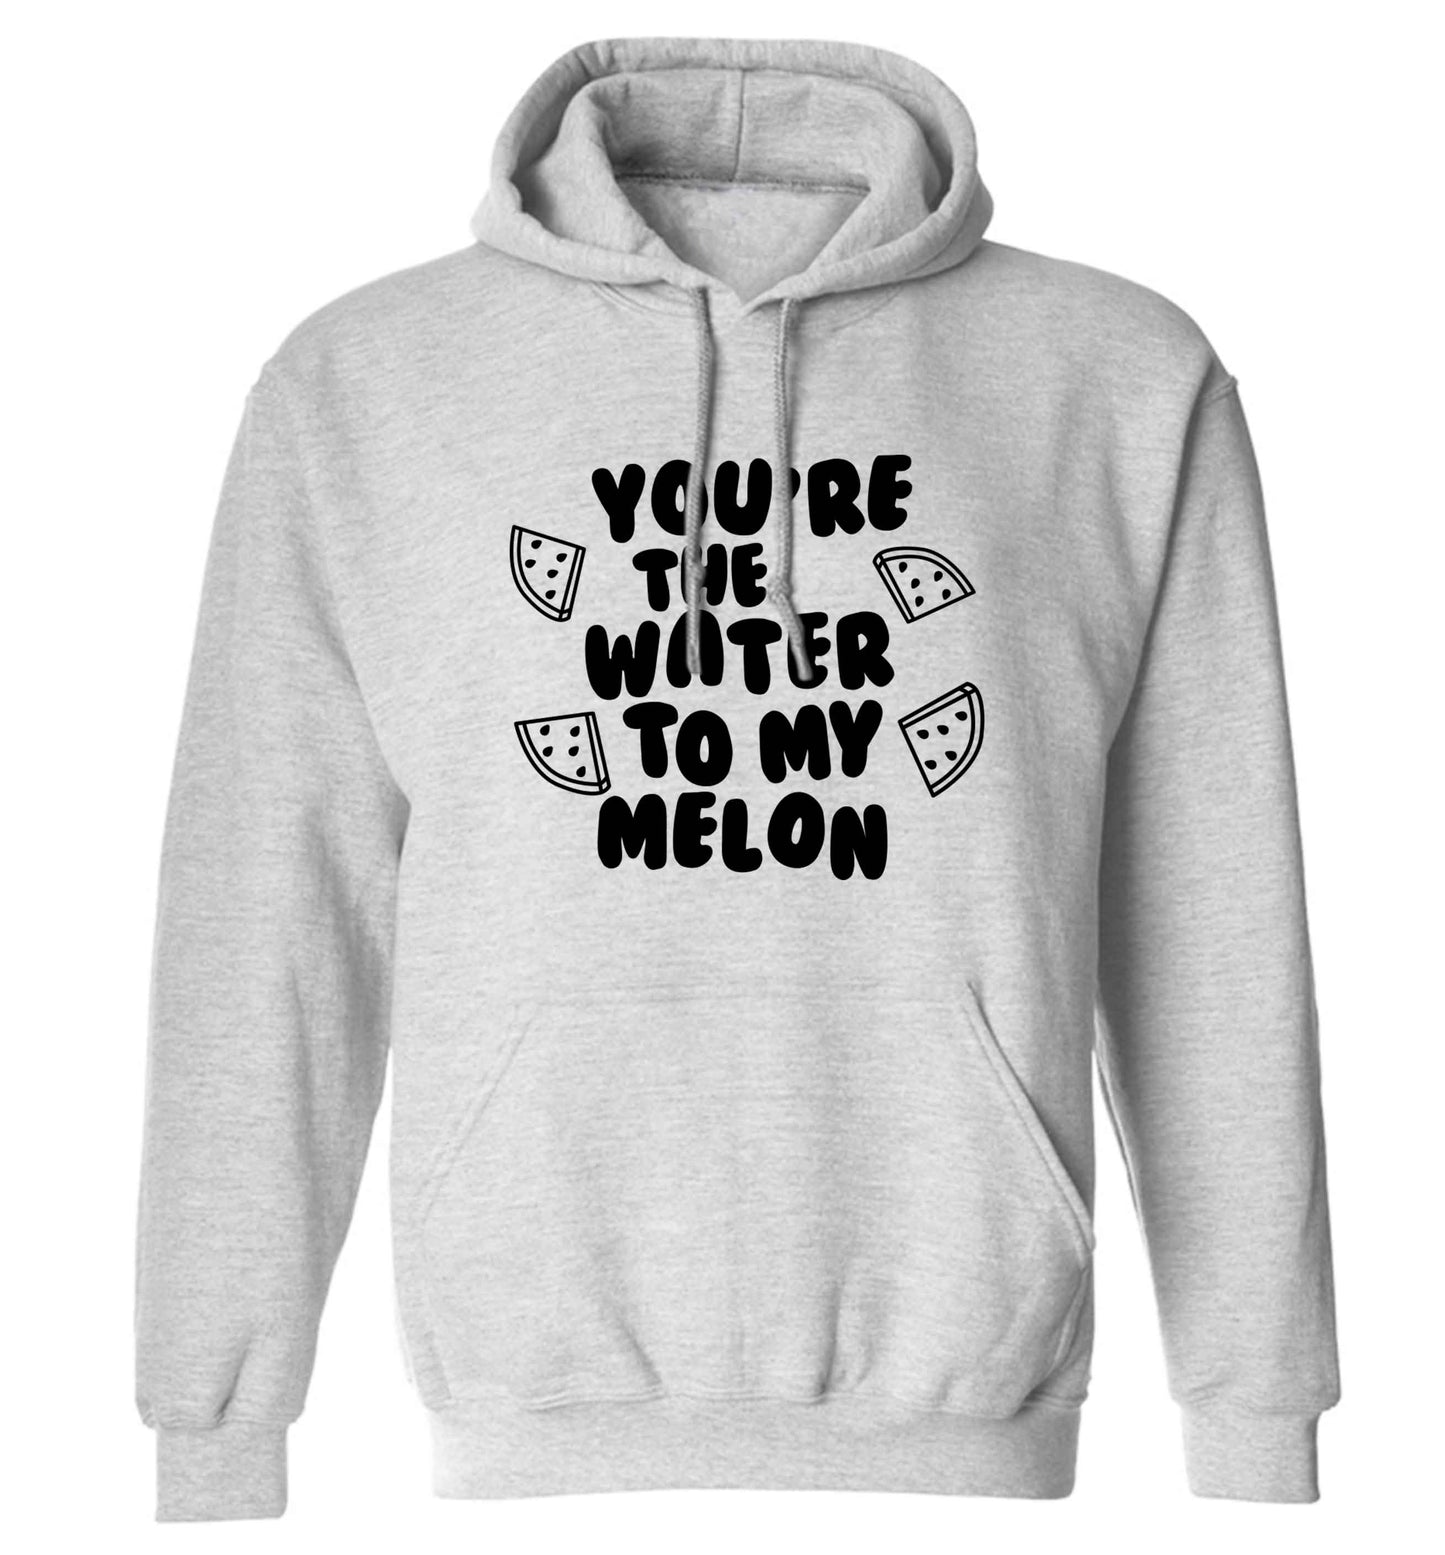 You're the water to my melon adults unisex grey hoodie 2XL